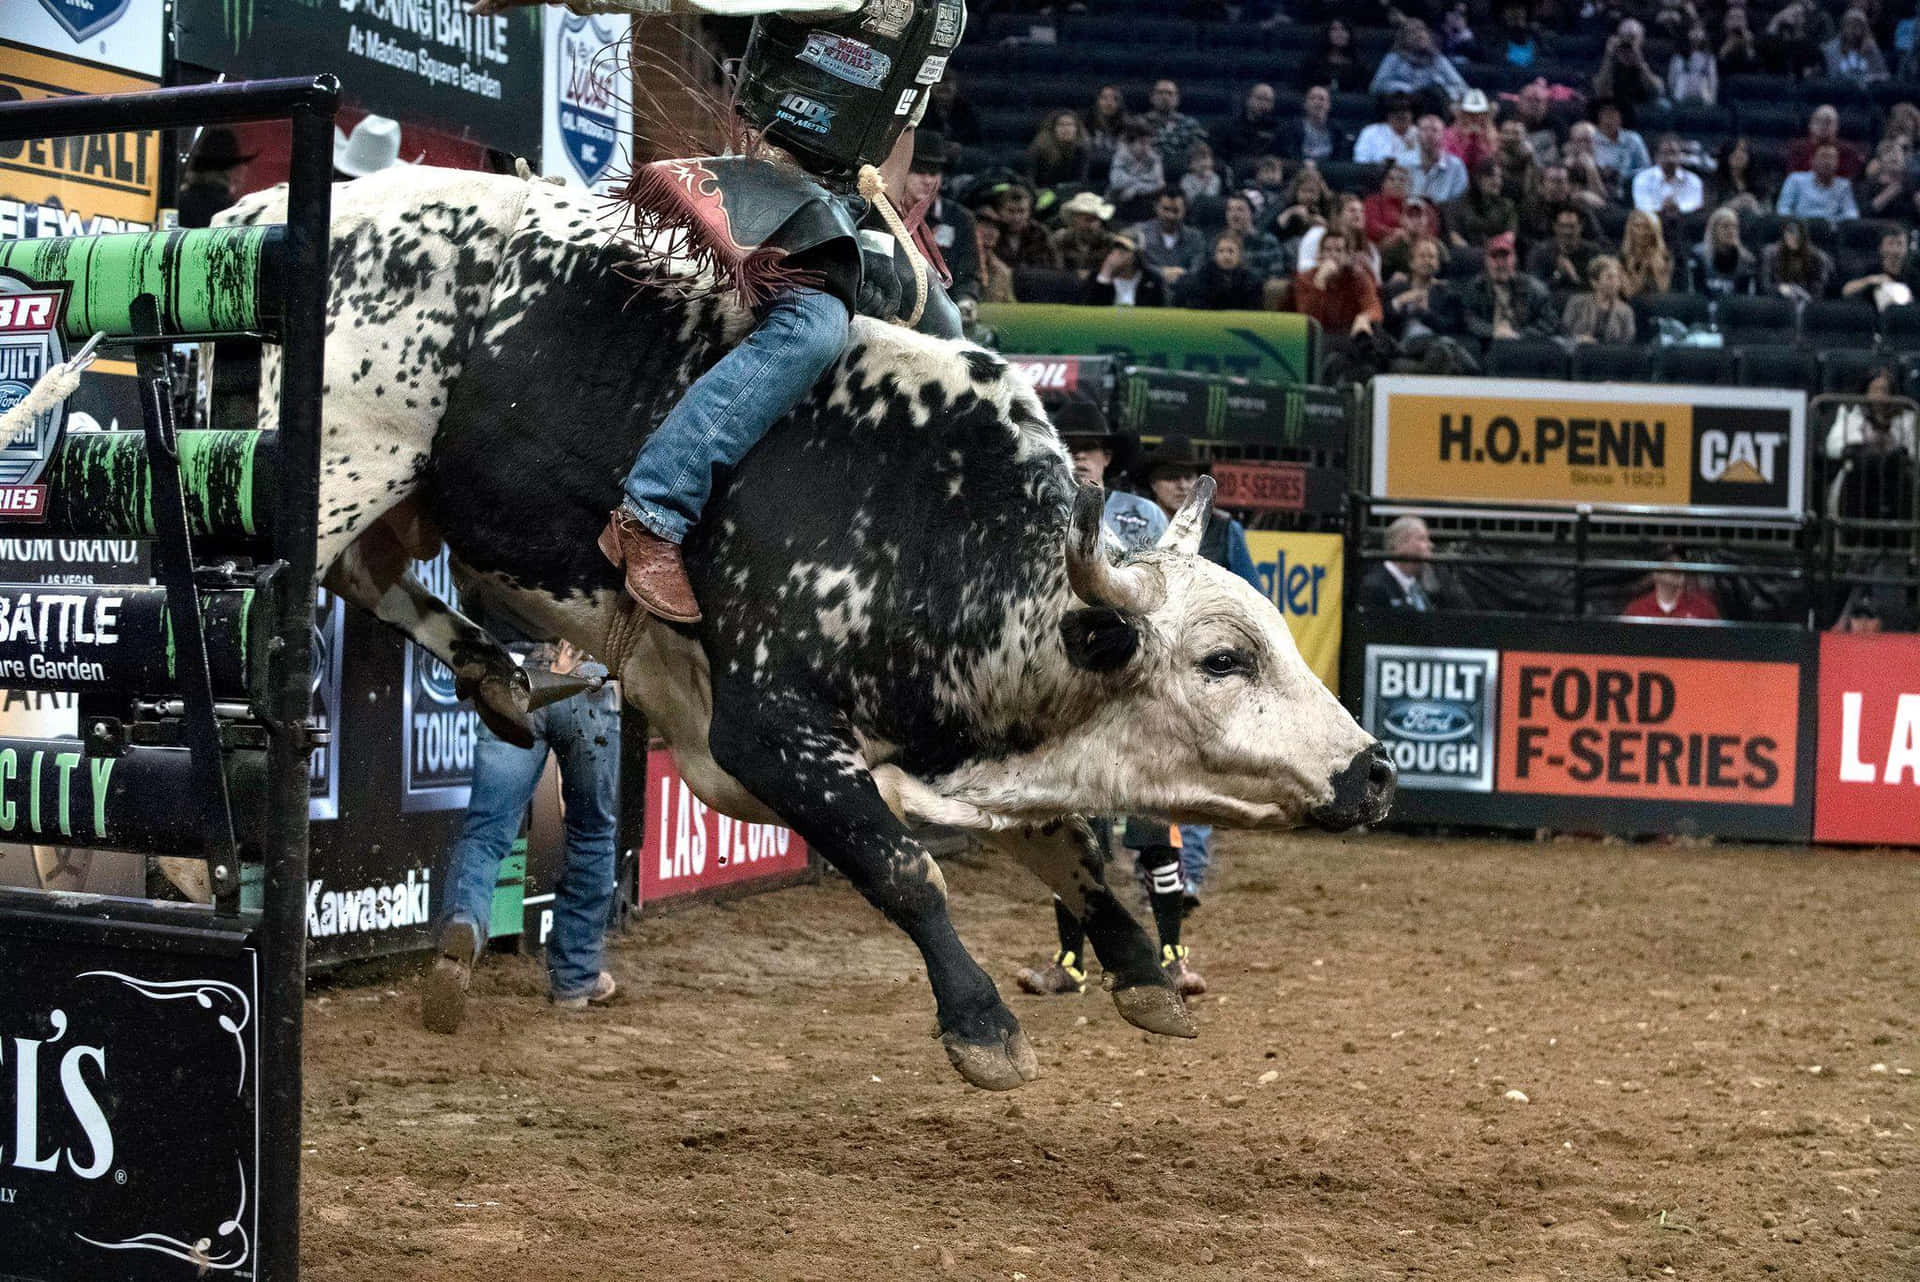 Master of the Sport - Bull Riding